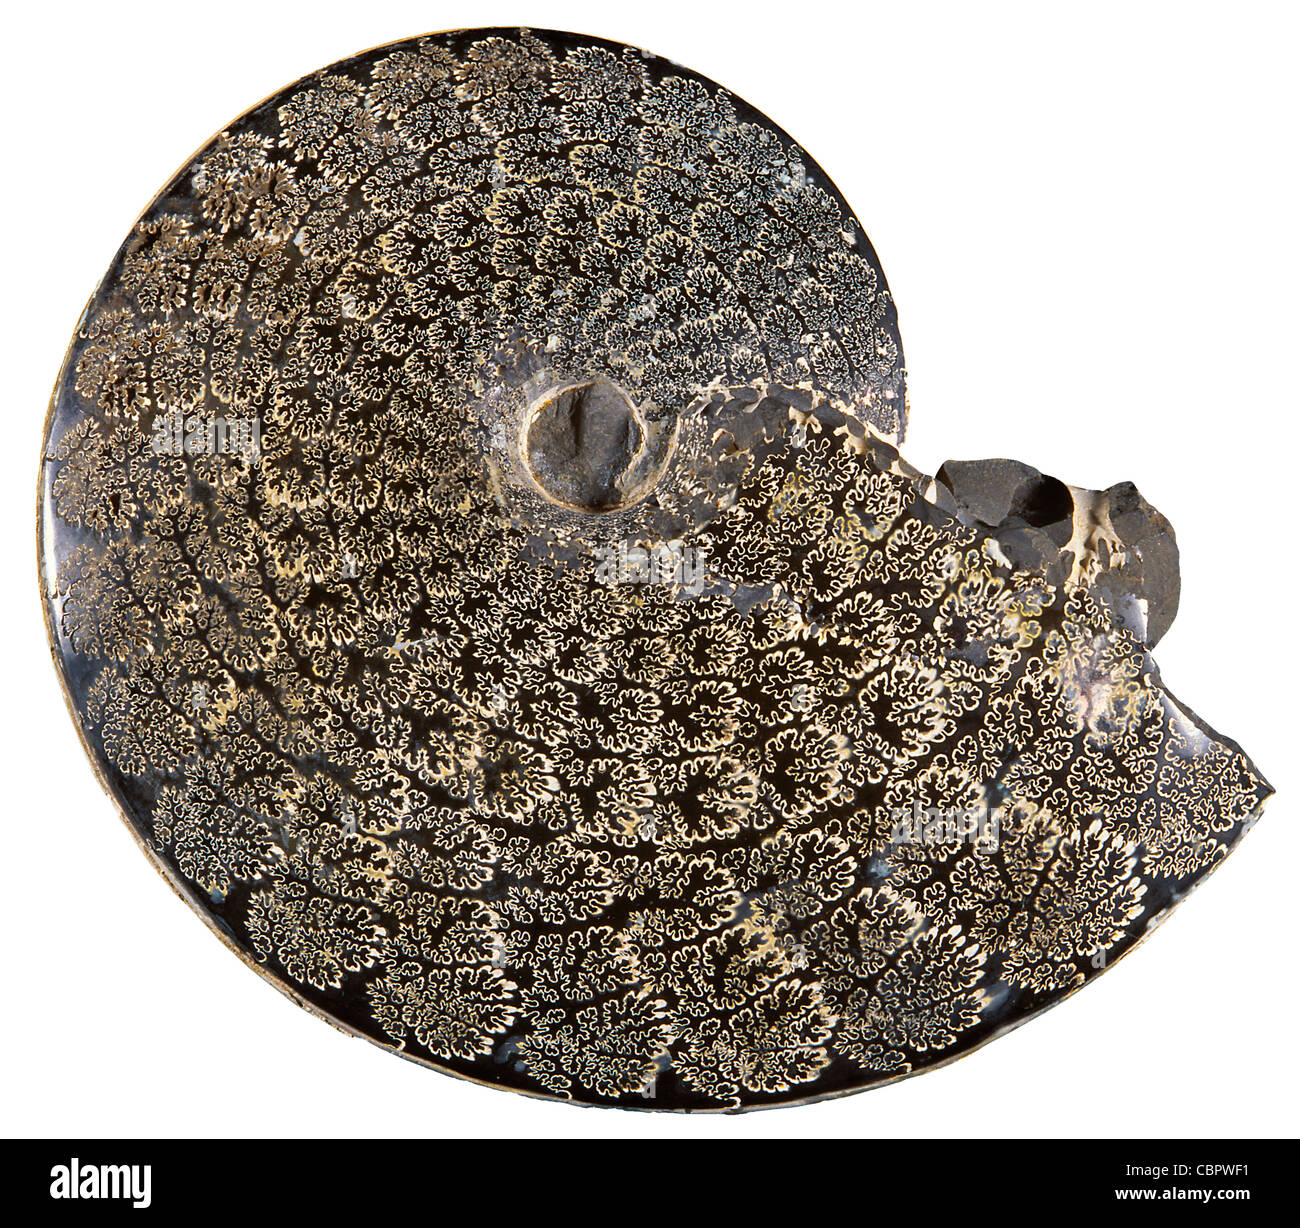 Fossil Ammonite Showing Growth Plates, Genus: Placenticeras Stock Photo